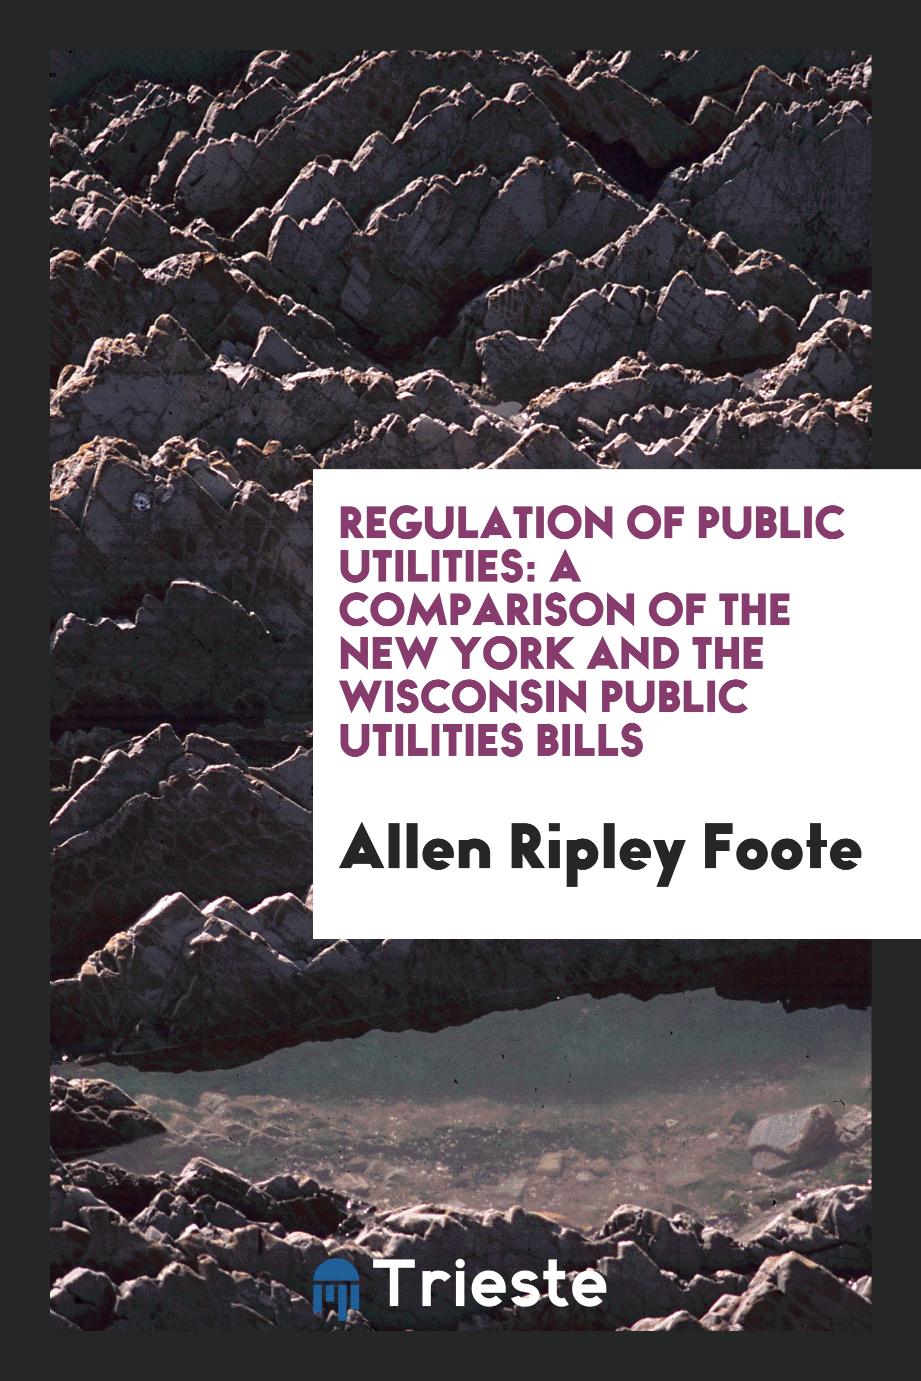 Regulation of public utilities: a comparison of the New York and the Wisconsin public utilities bills